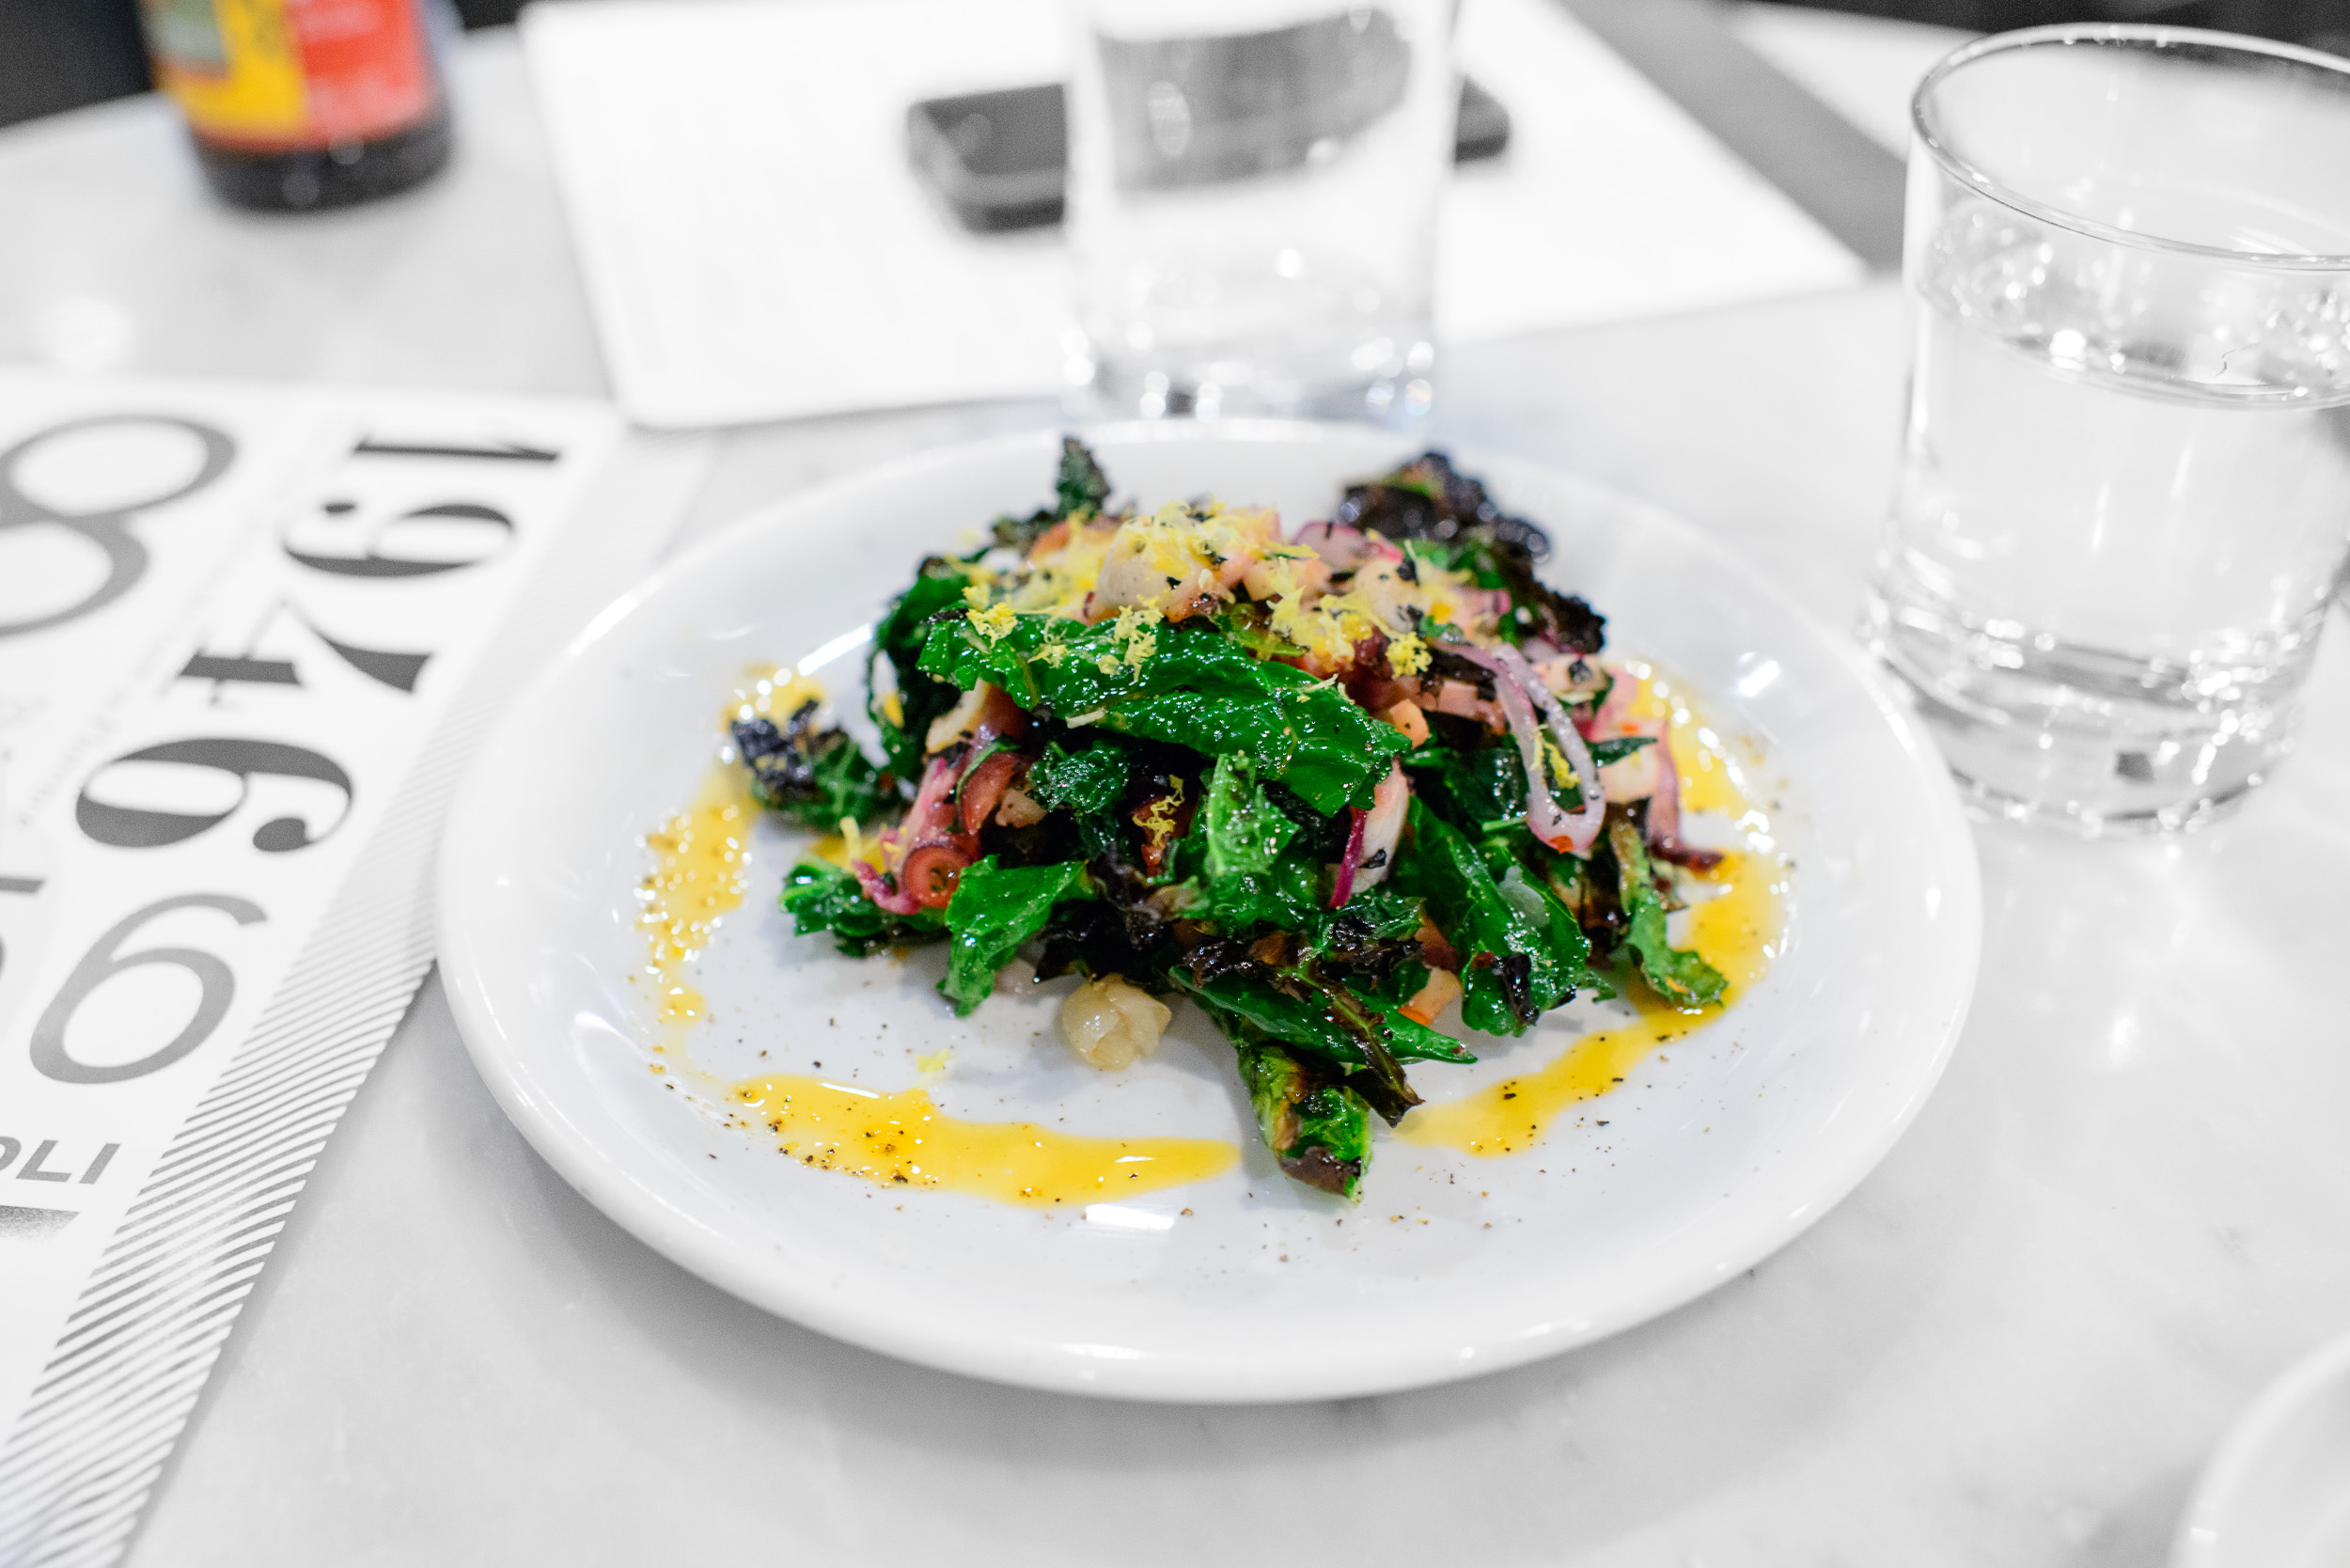 Polpo caldo - warm octopus and kale, red onions, shell beans, ch